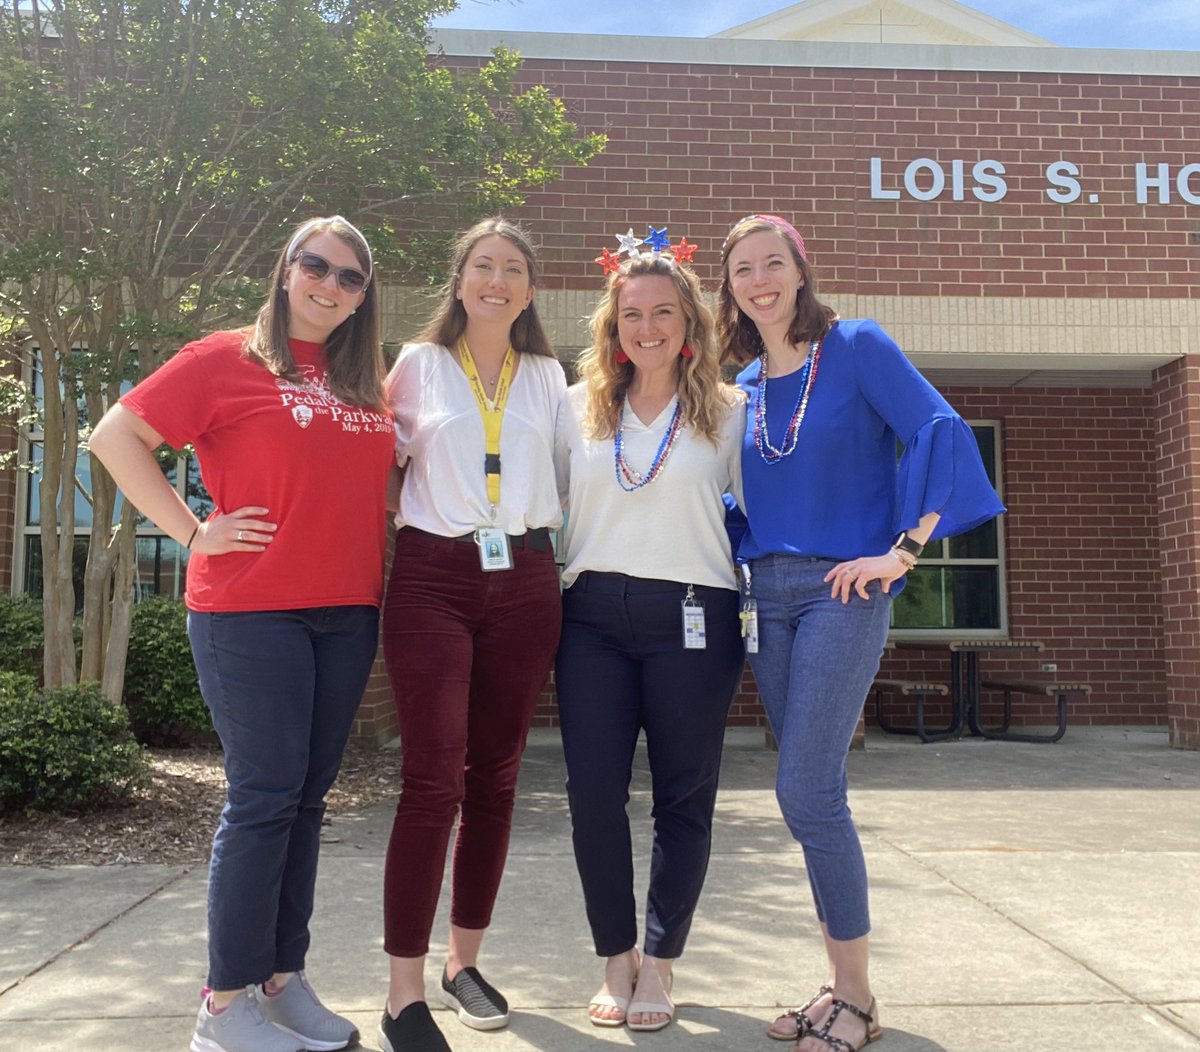 Reppin’ the #RedWhiteandBlue for #MOTMC spirit week today! Each grade level had a different color to wear ❤️🤍💙 @LoisHornsbyMS @mizz_coble @bex_souther #military #militarychild #motmc23 #wearewjcc